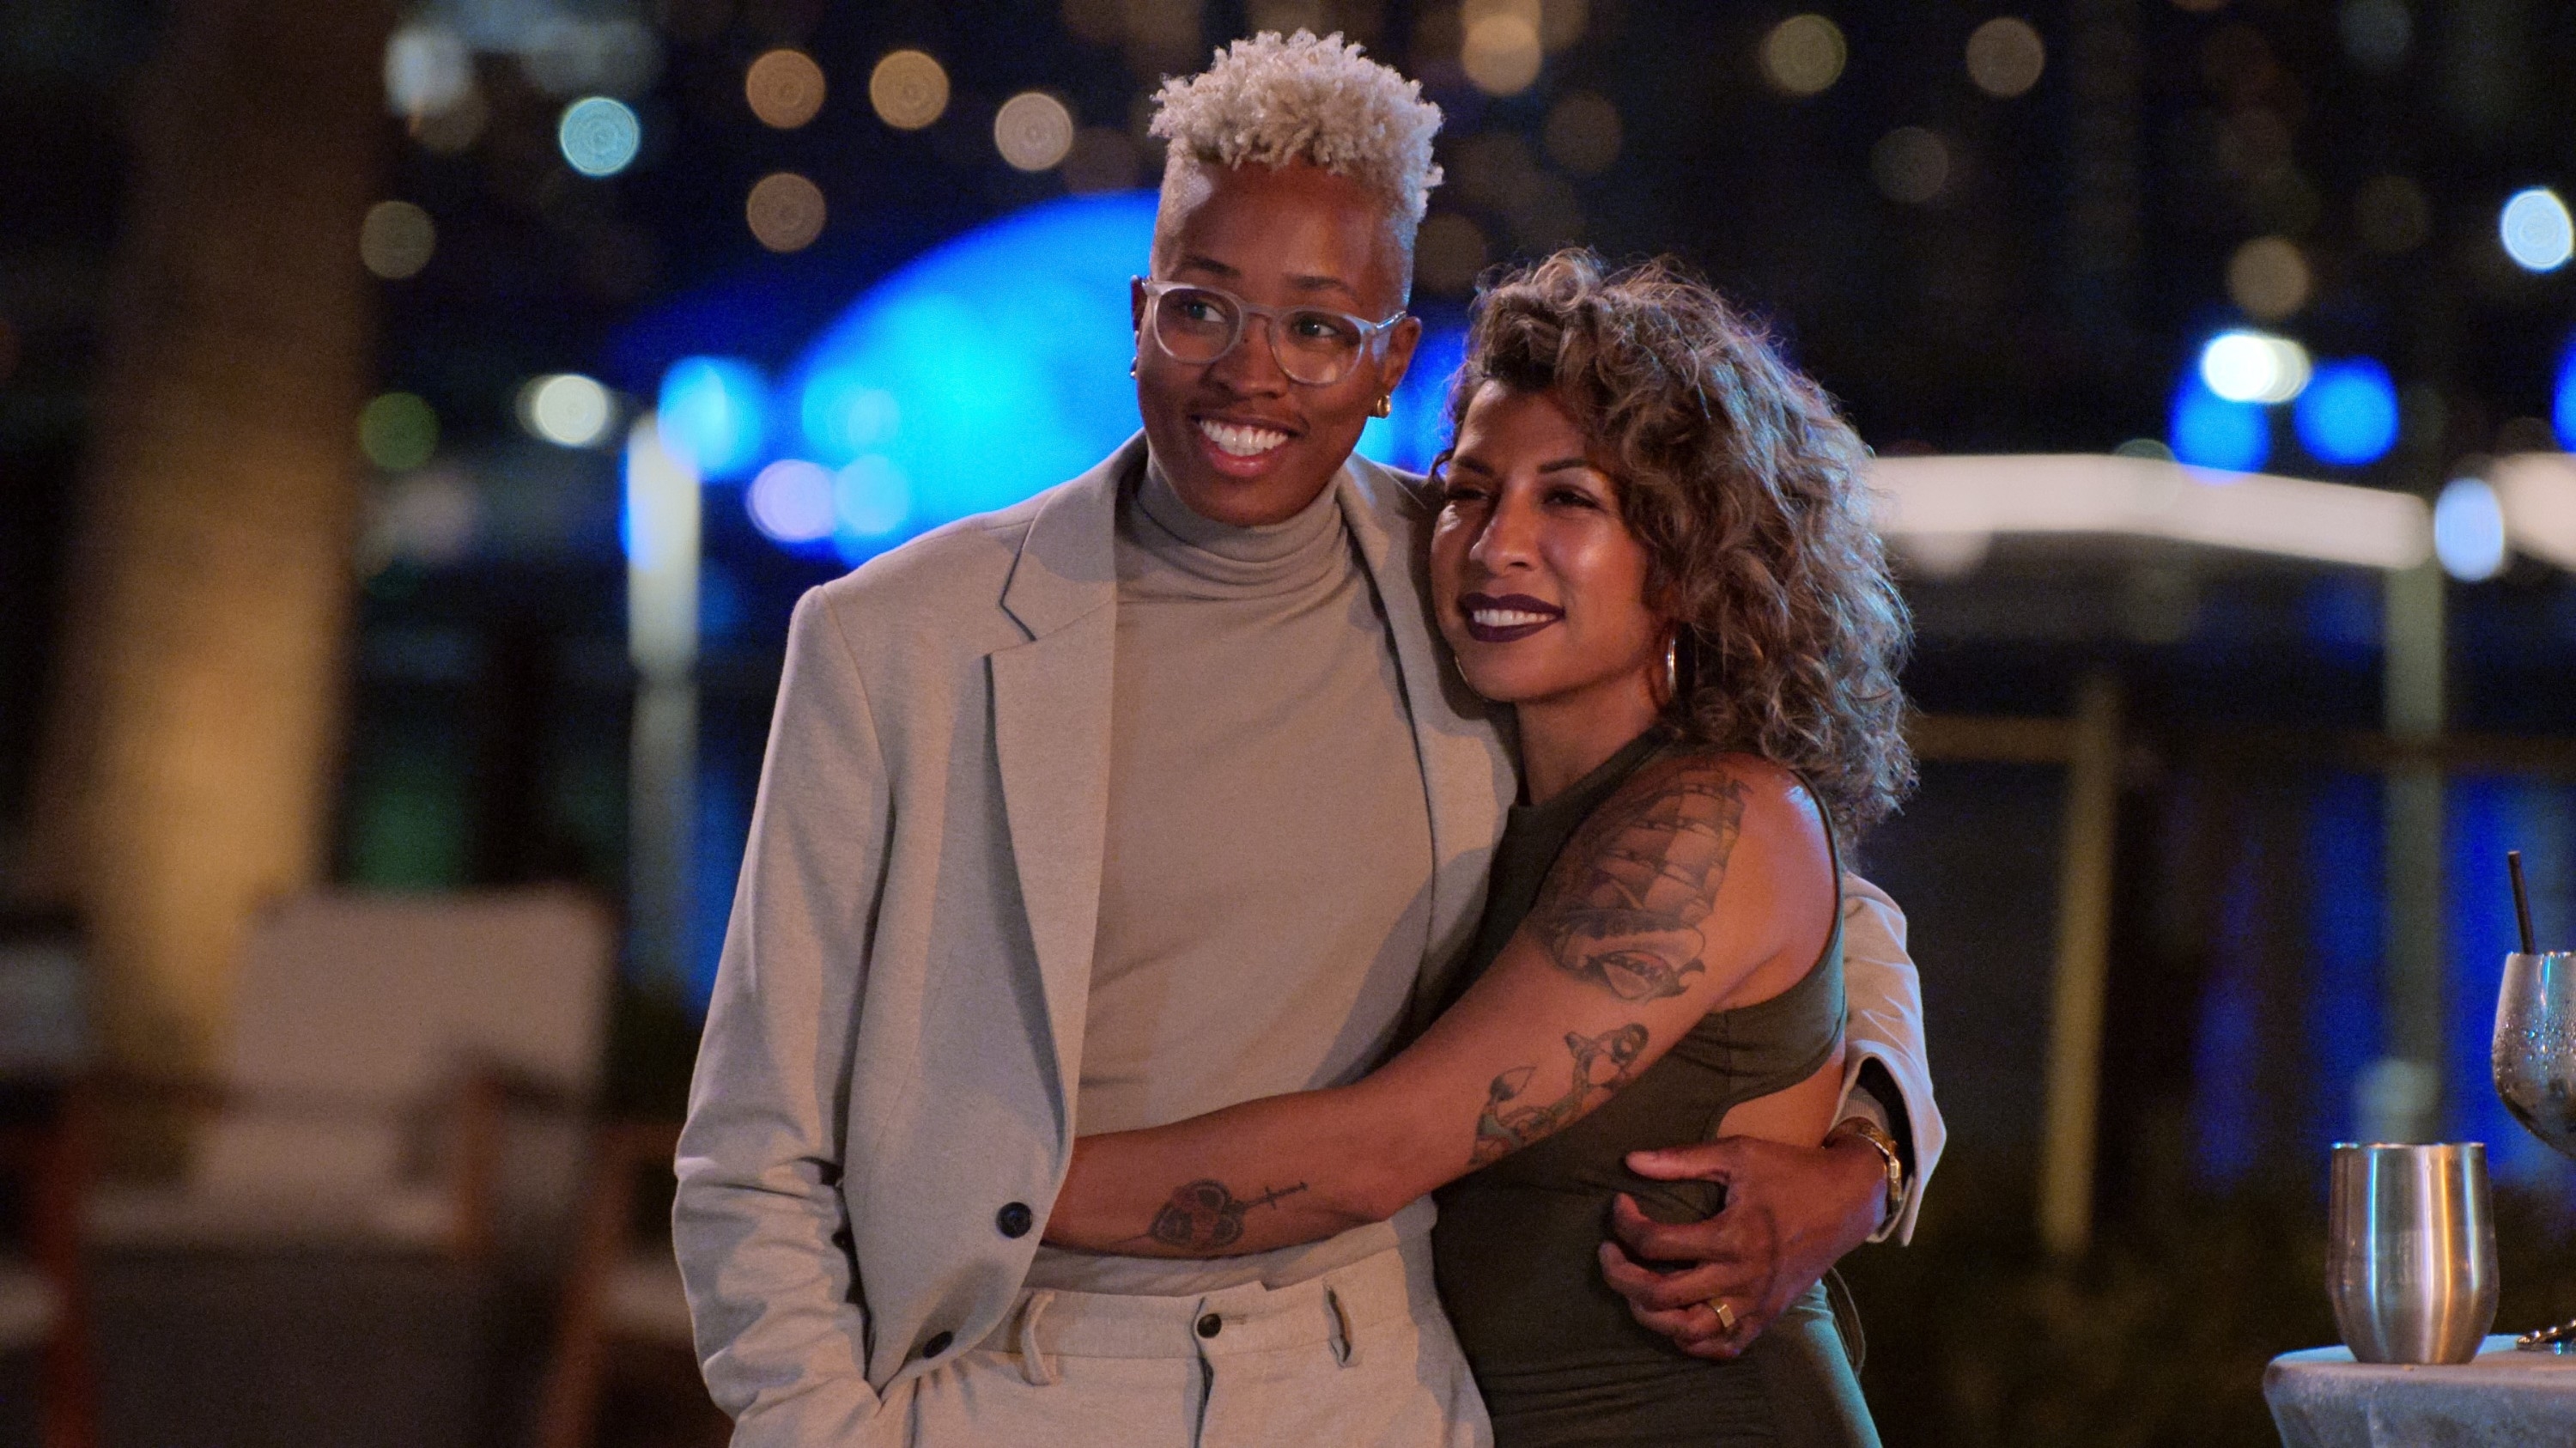 Mal Wright and Yoly Rojas smiling and embracing, one in a suit and the other with tattoos, at an outdoor evening event